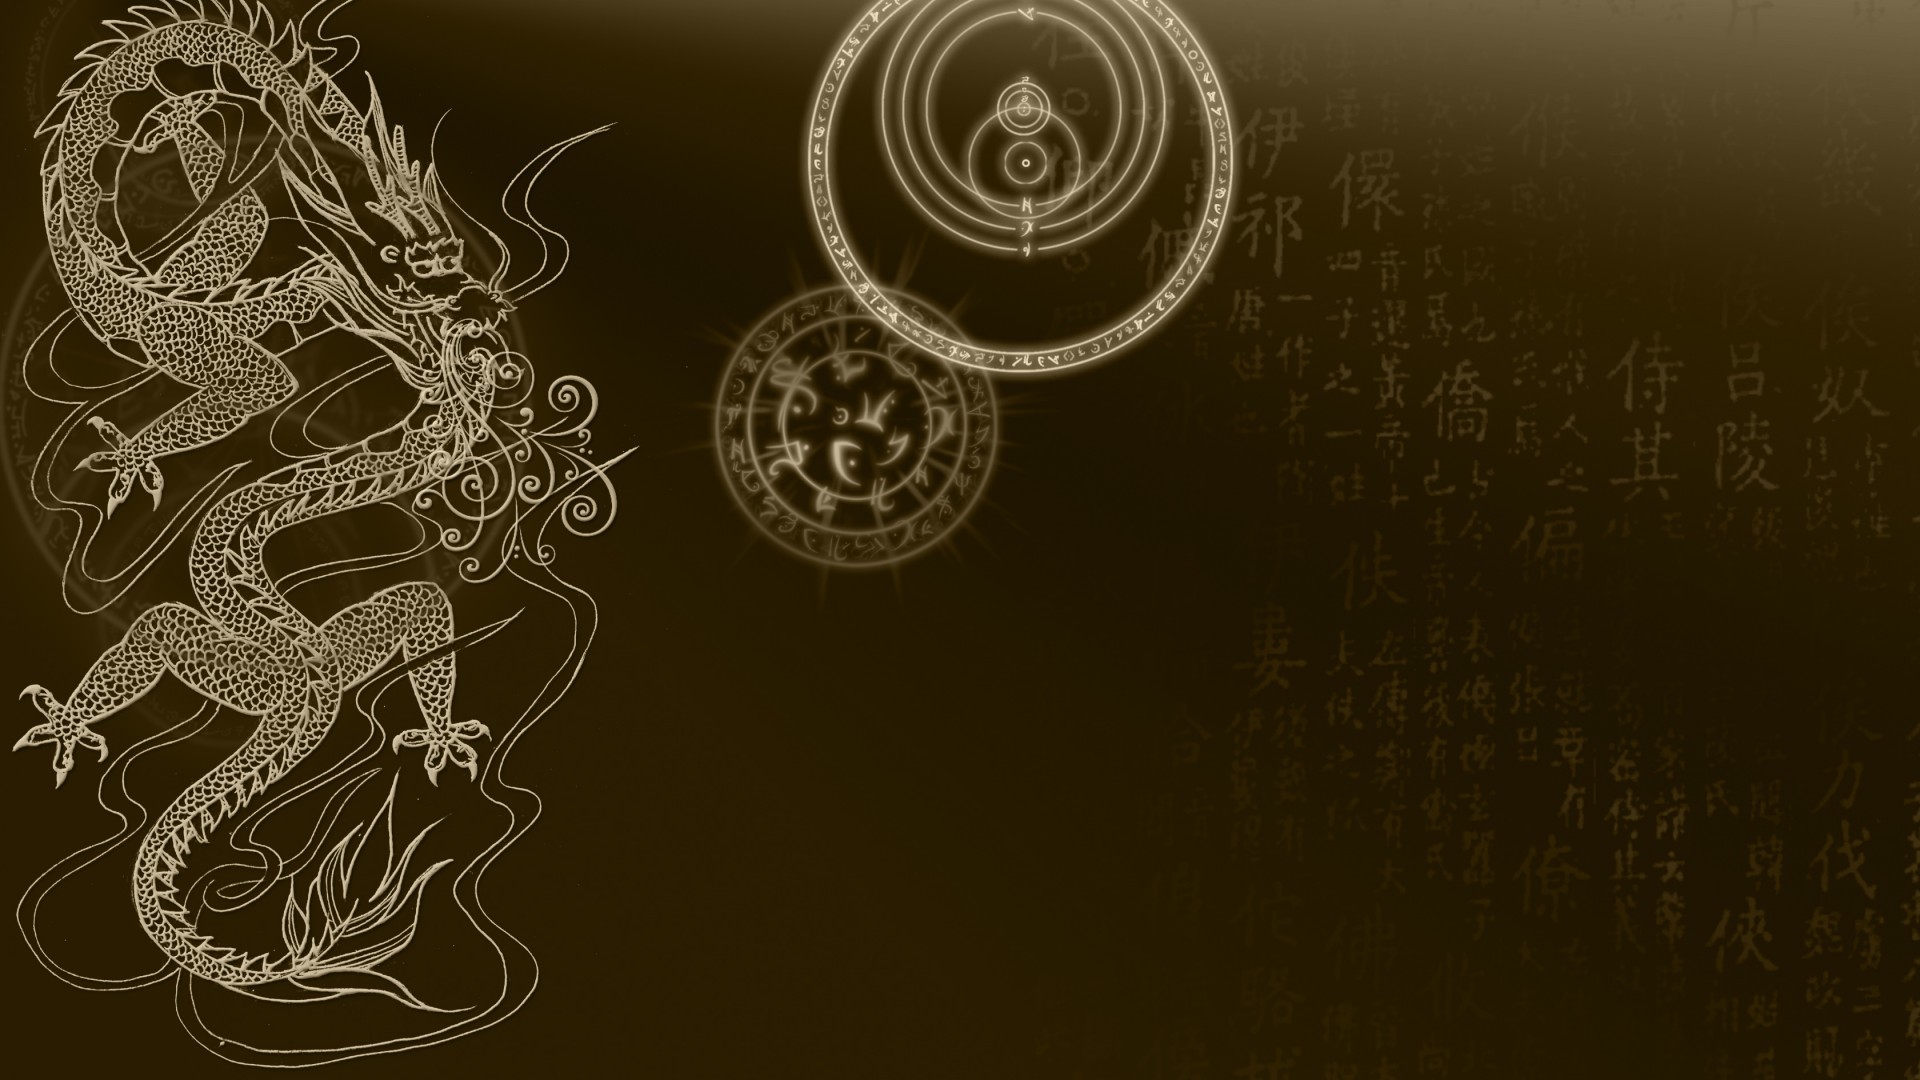 Download - Chinese Dragon Backgrounds - HD Wallpaper 